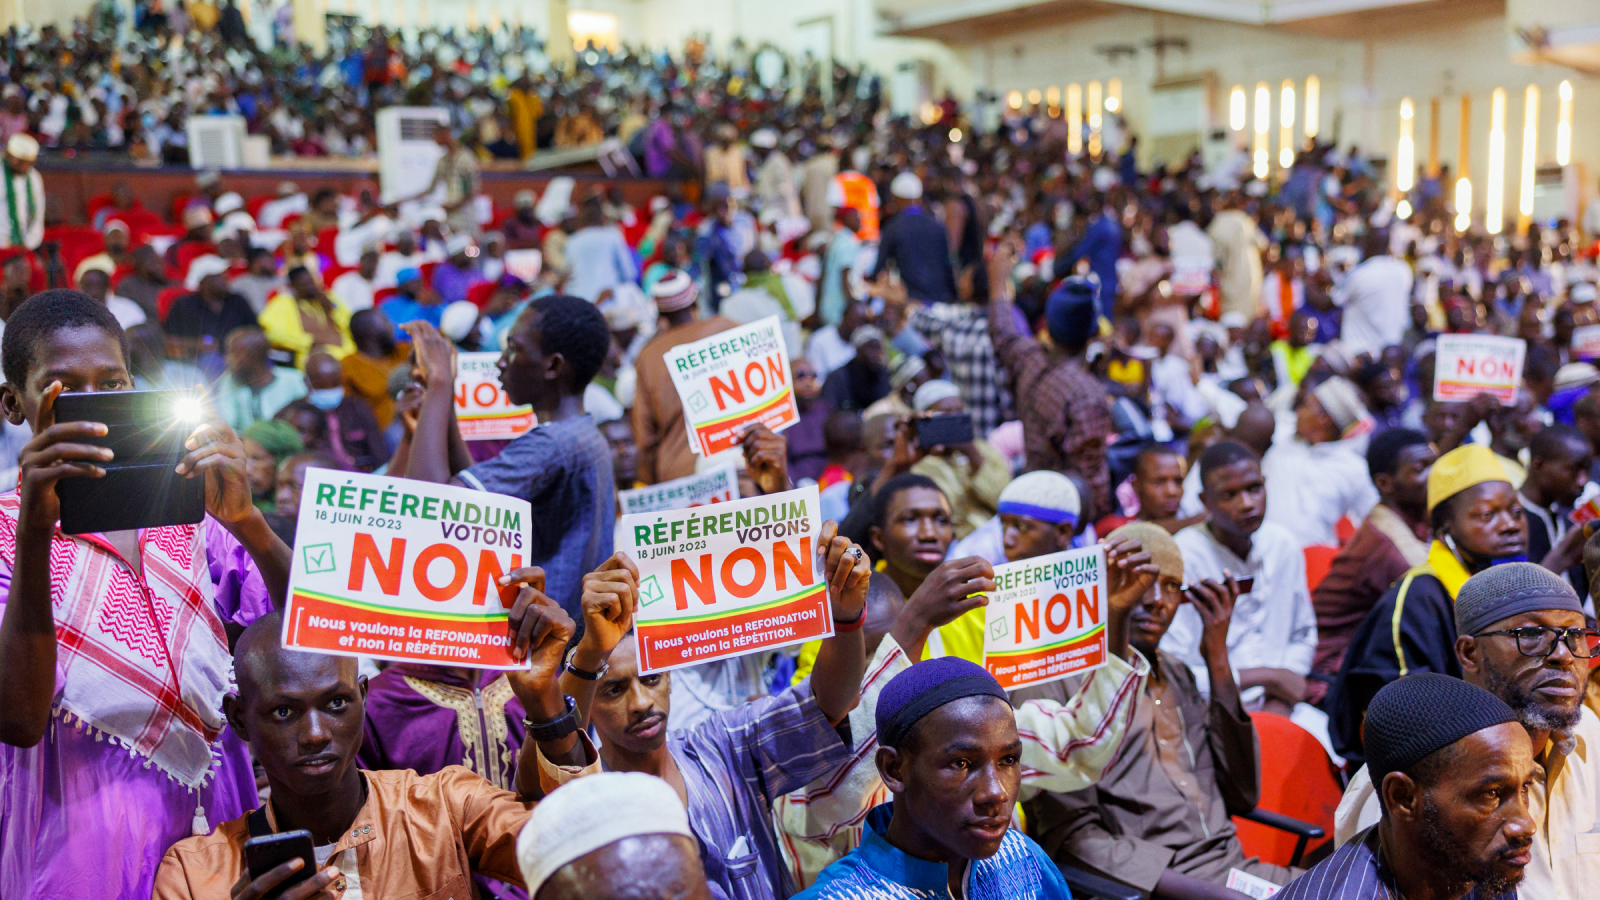 People hold up signs that read "vote no in the referendum" during a march in Bamako, Mali.